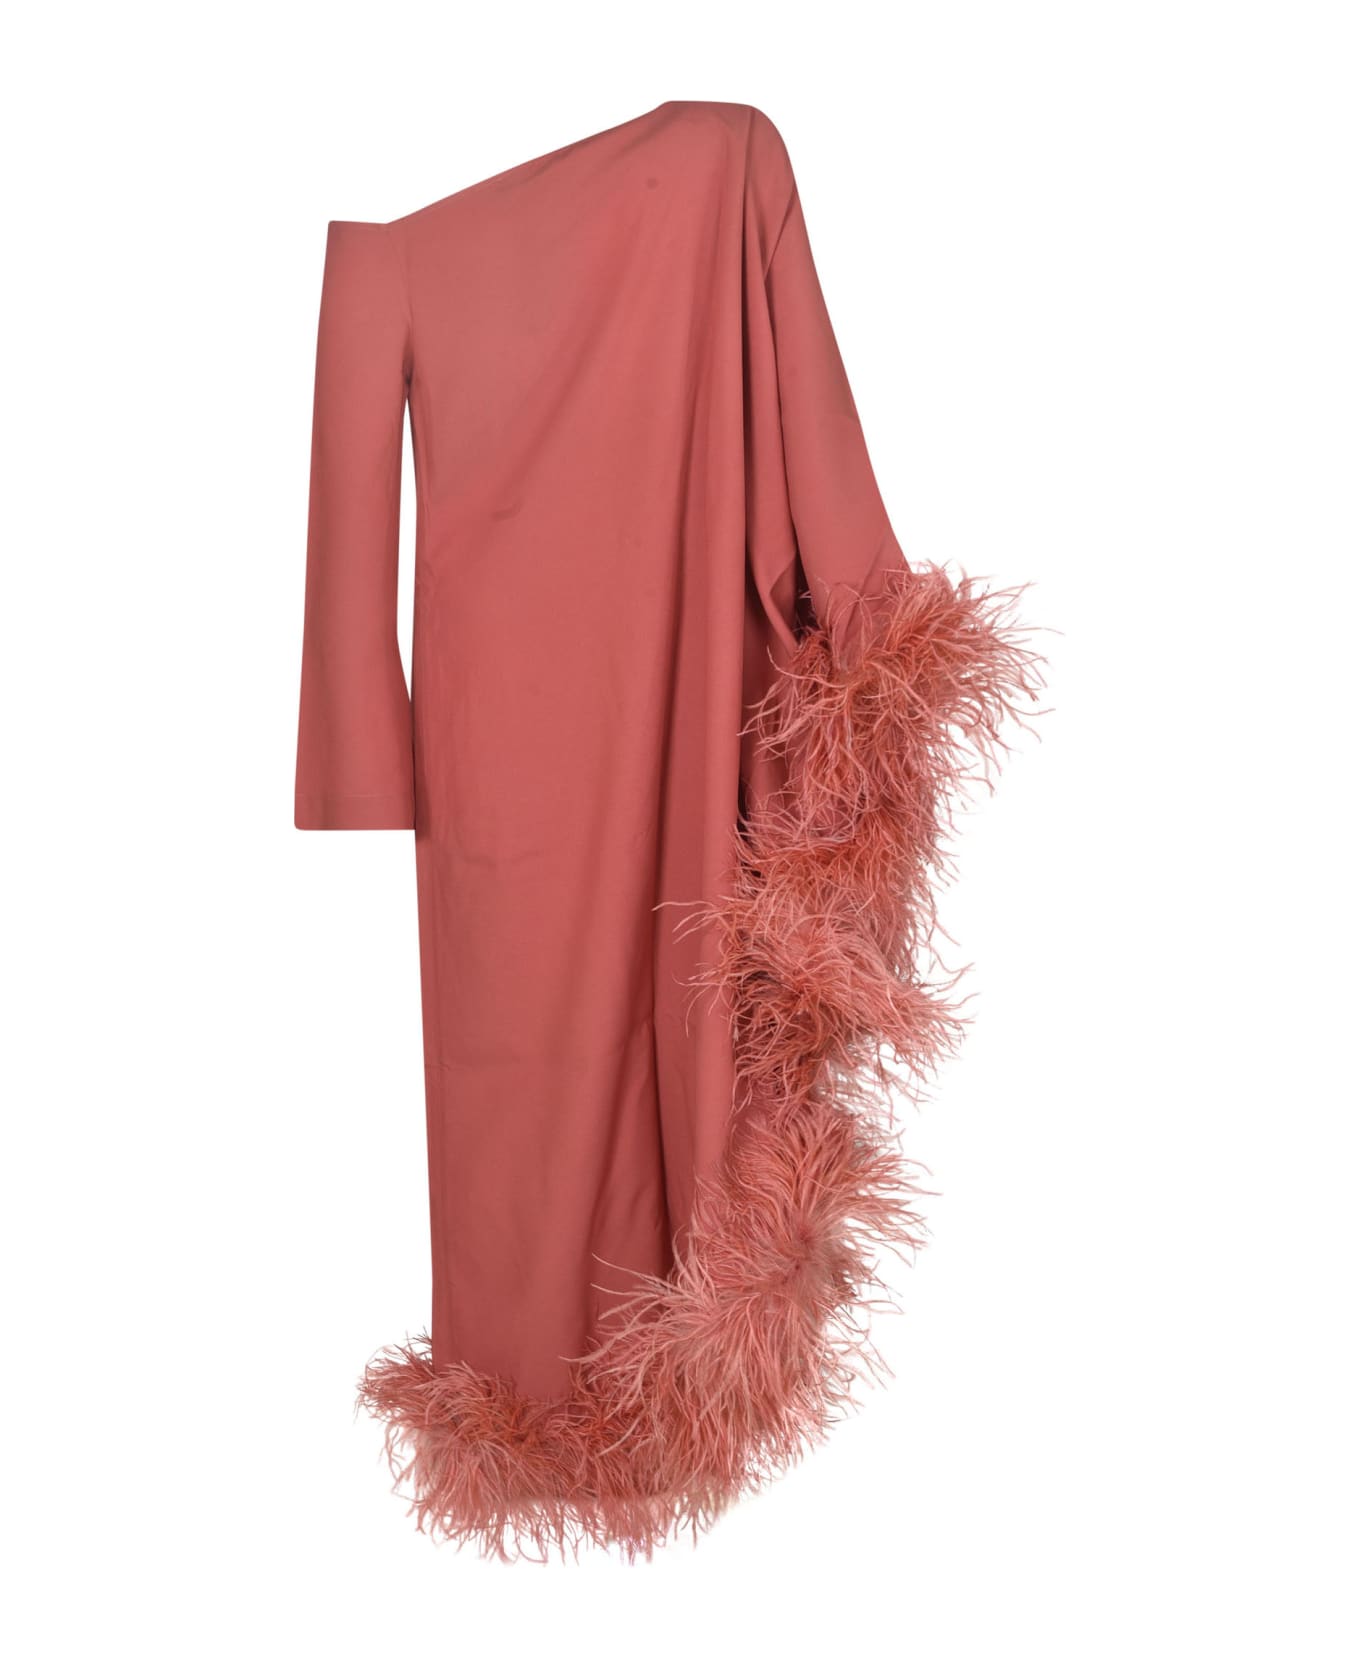 Taller Marmo Feathered Cuff One-shoulder Long Dress - Peonia